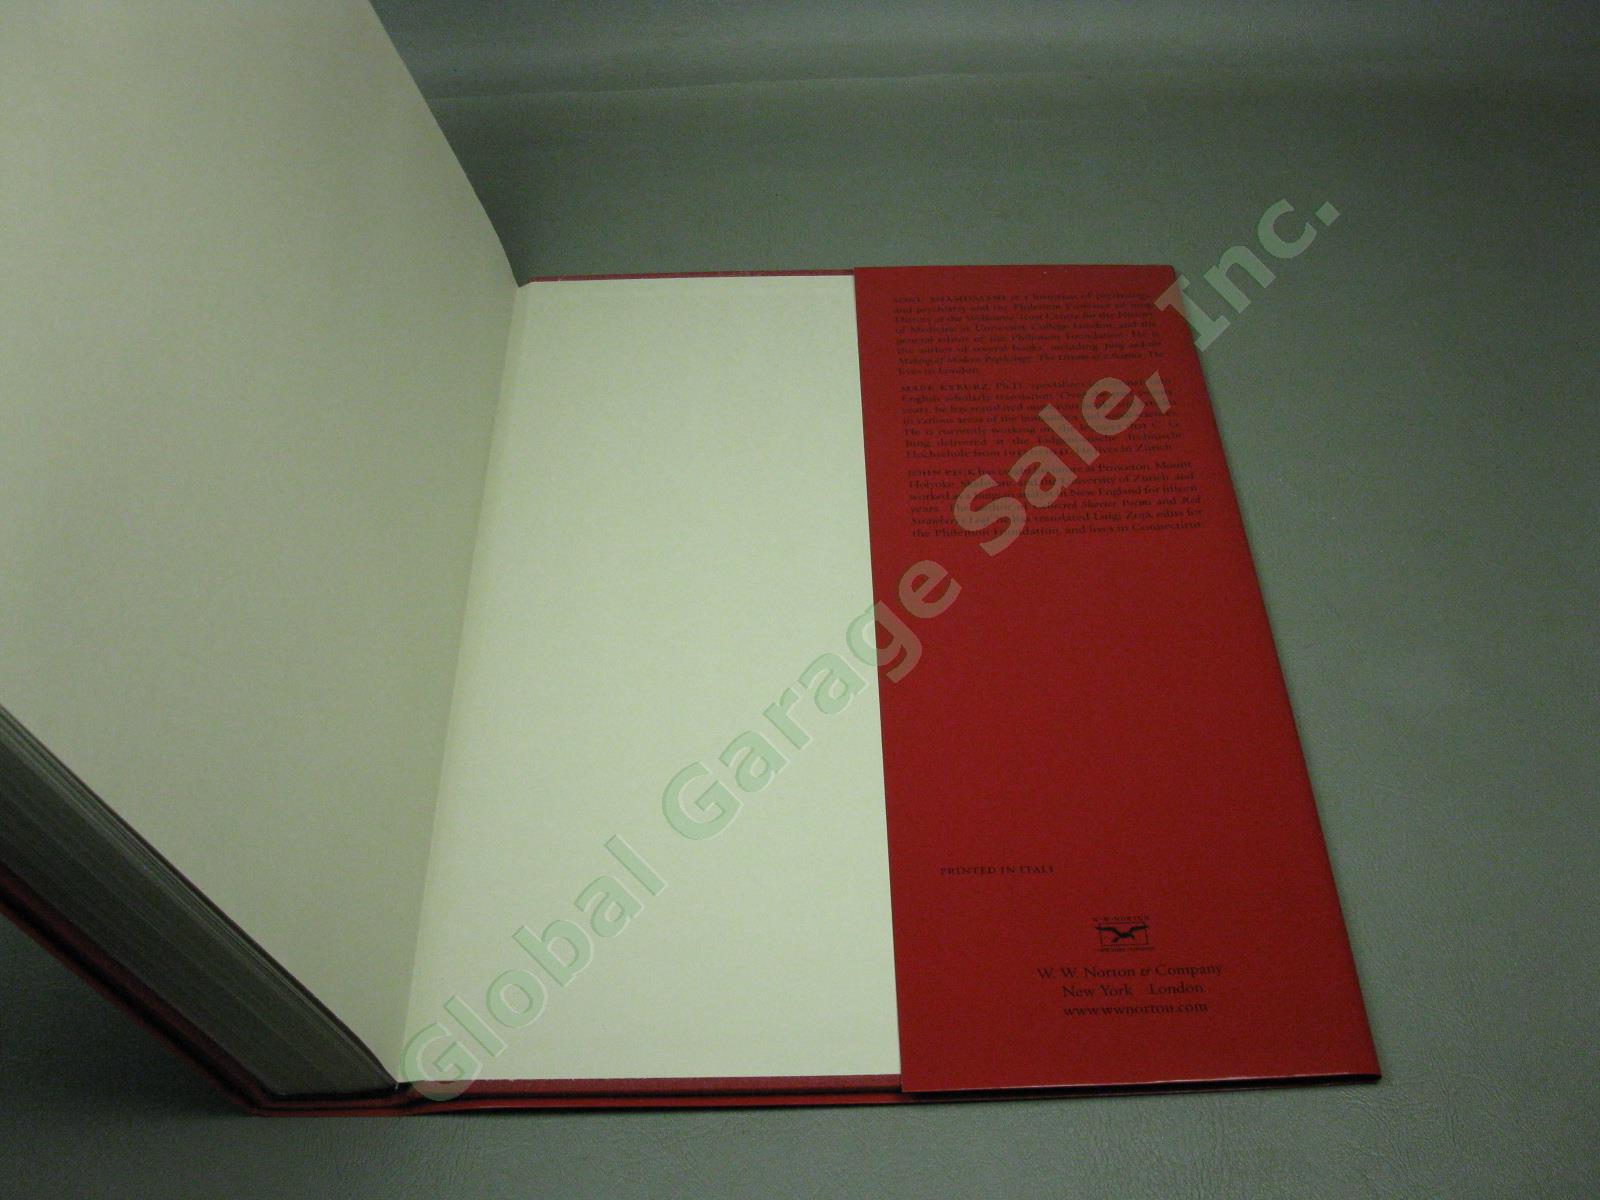 C.G Carl Jung The Red Book Liber Novus 2009 First Edition Hardcover +Dust Jacket 12